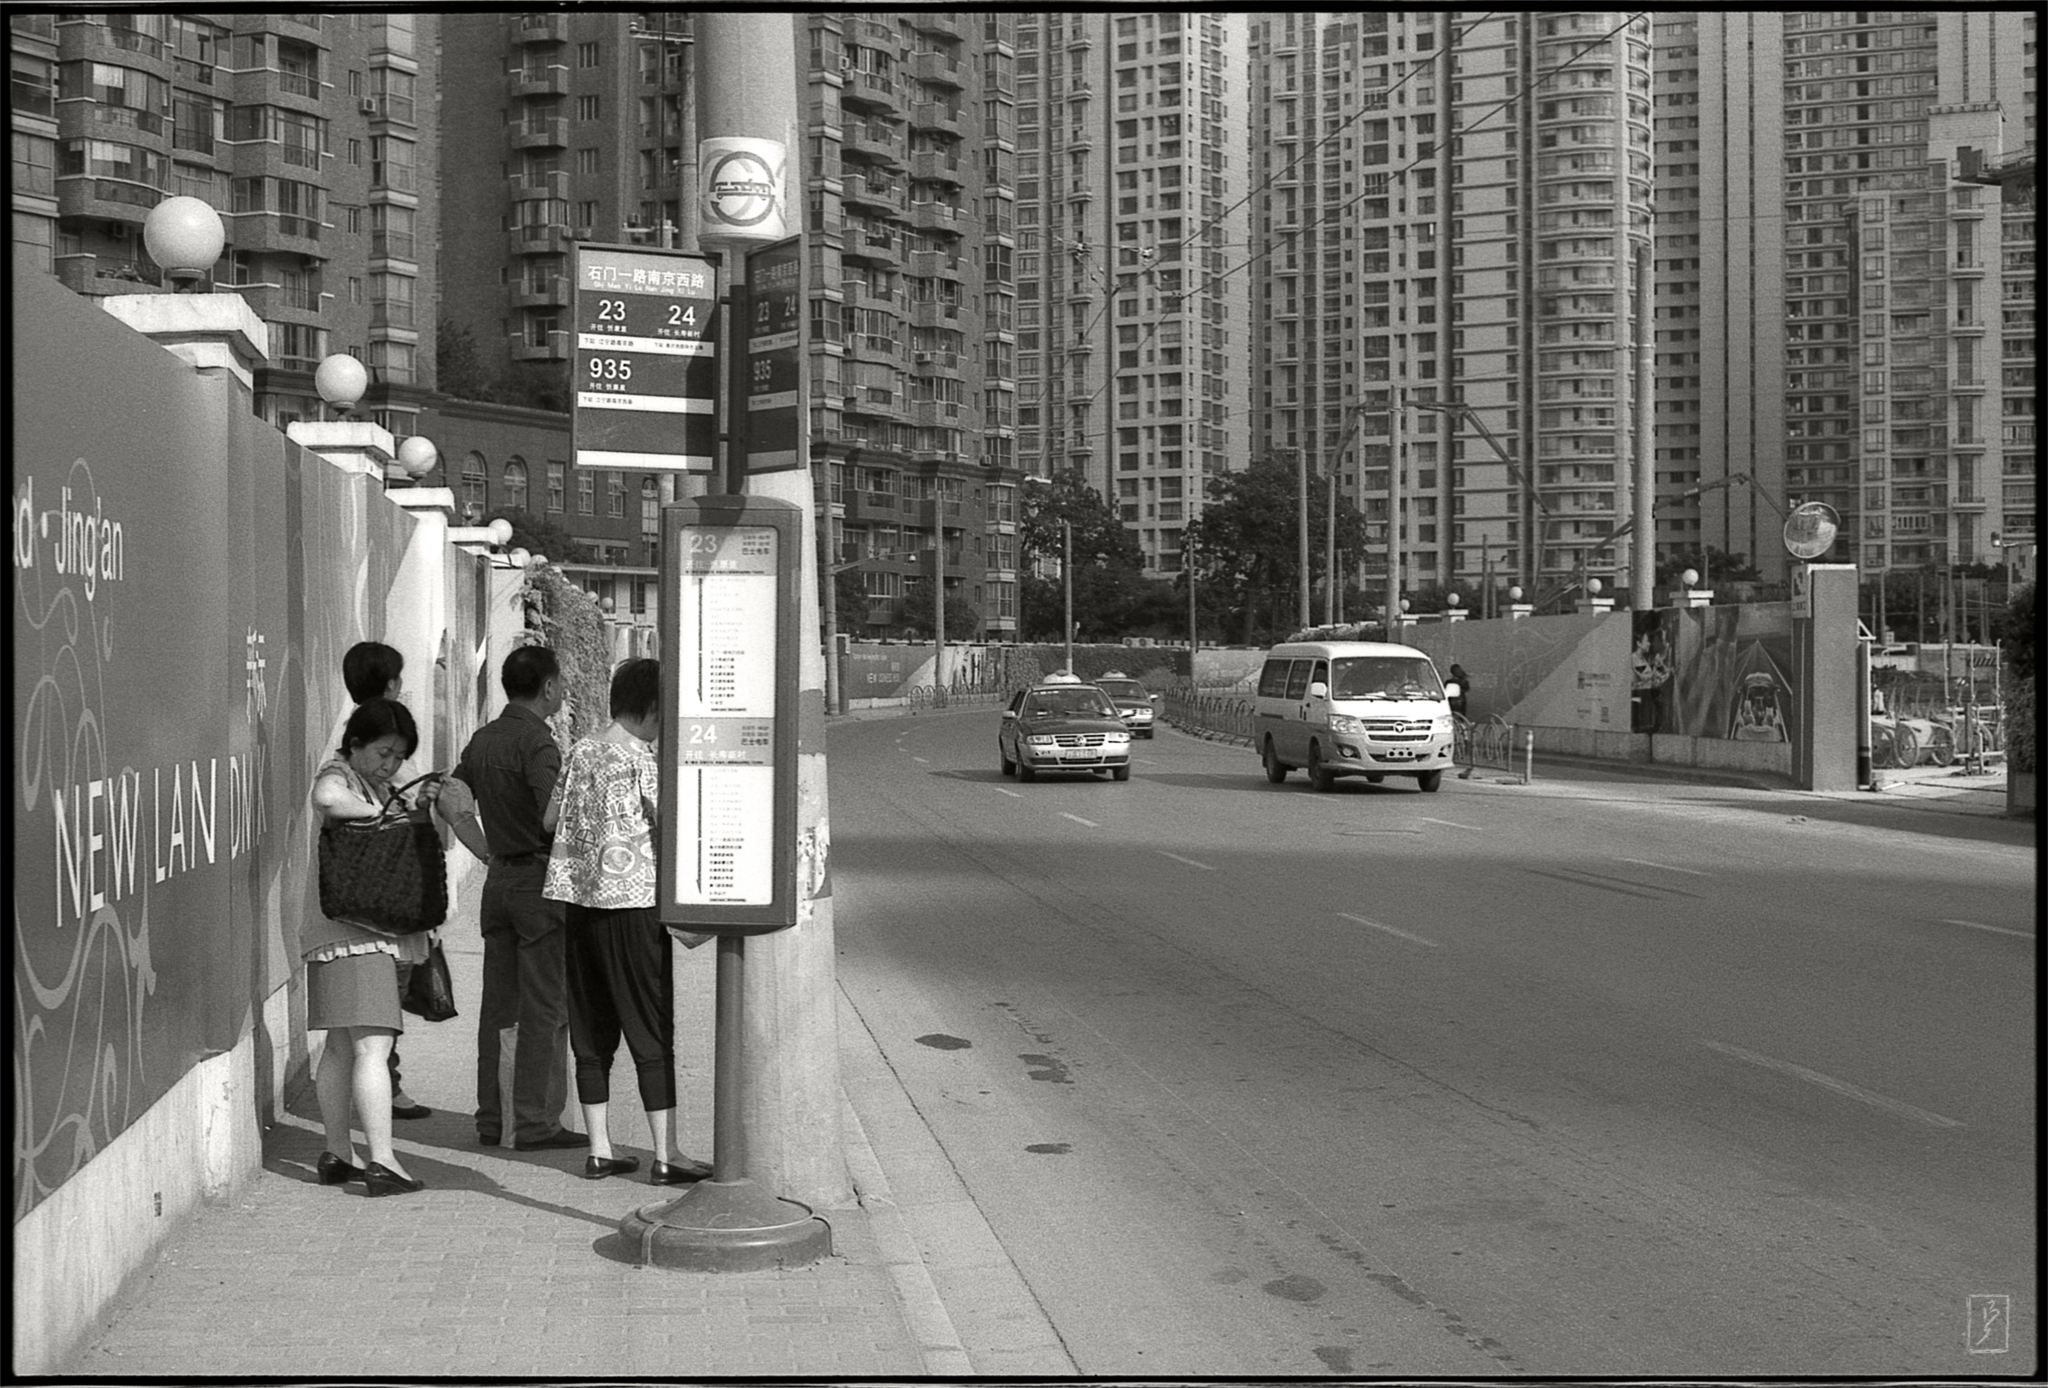 A bus stop and a backdrop of new appartments near the intersection Shimen yilu/Nanjing xilu in the heart of the city.